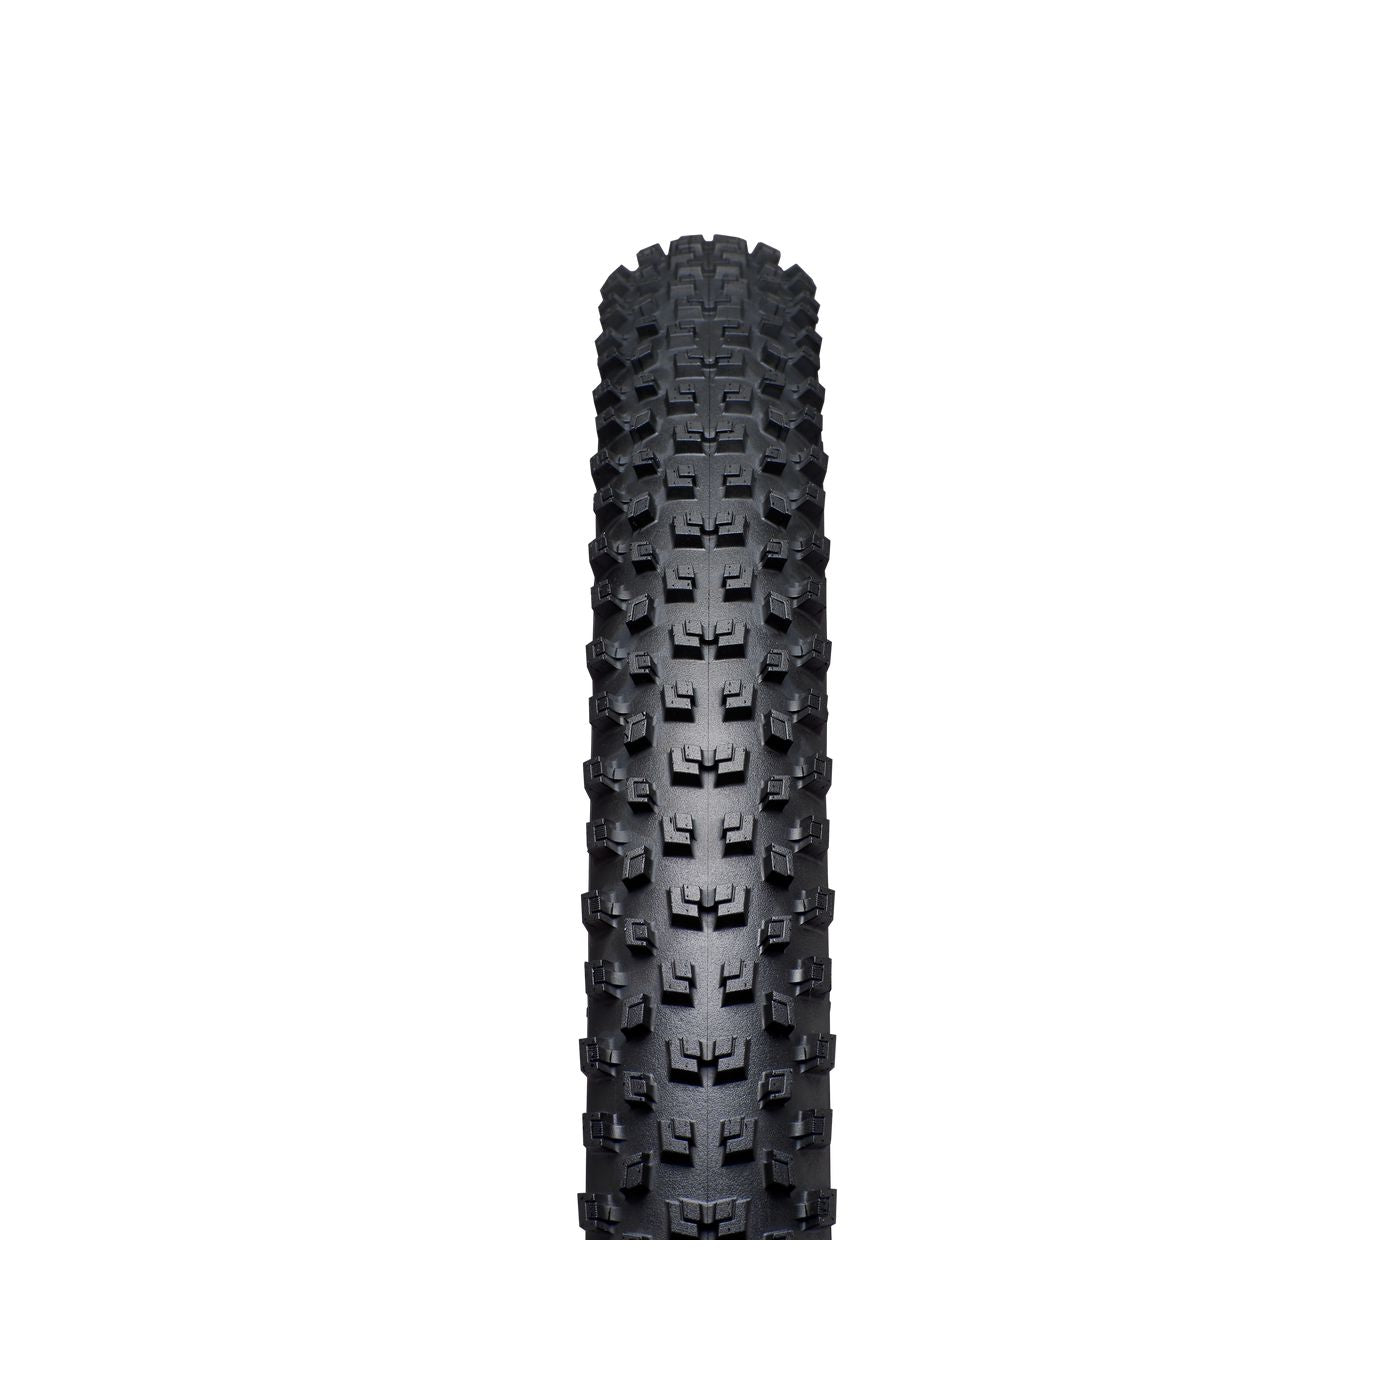 Specialized Ground Control 24" Bike Tire - Tires - Bicycle Warehouse